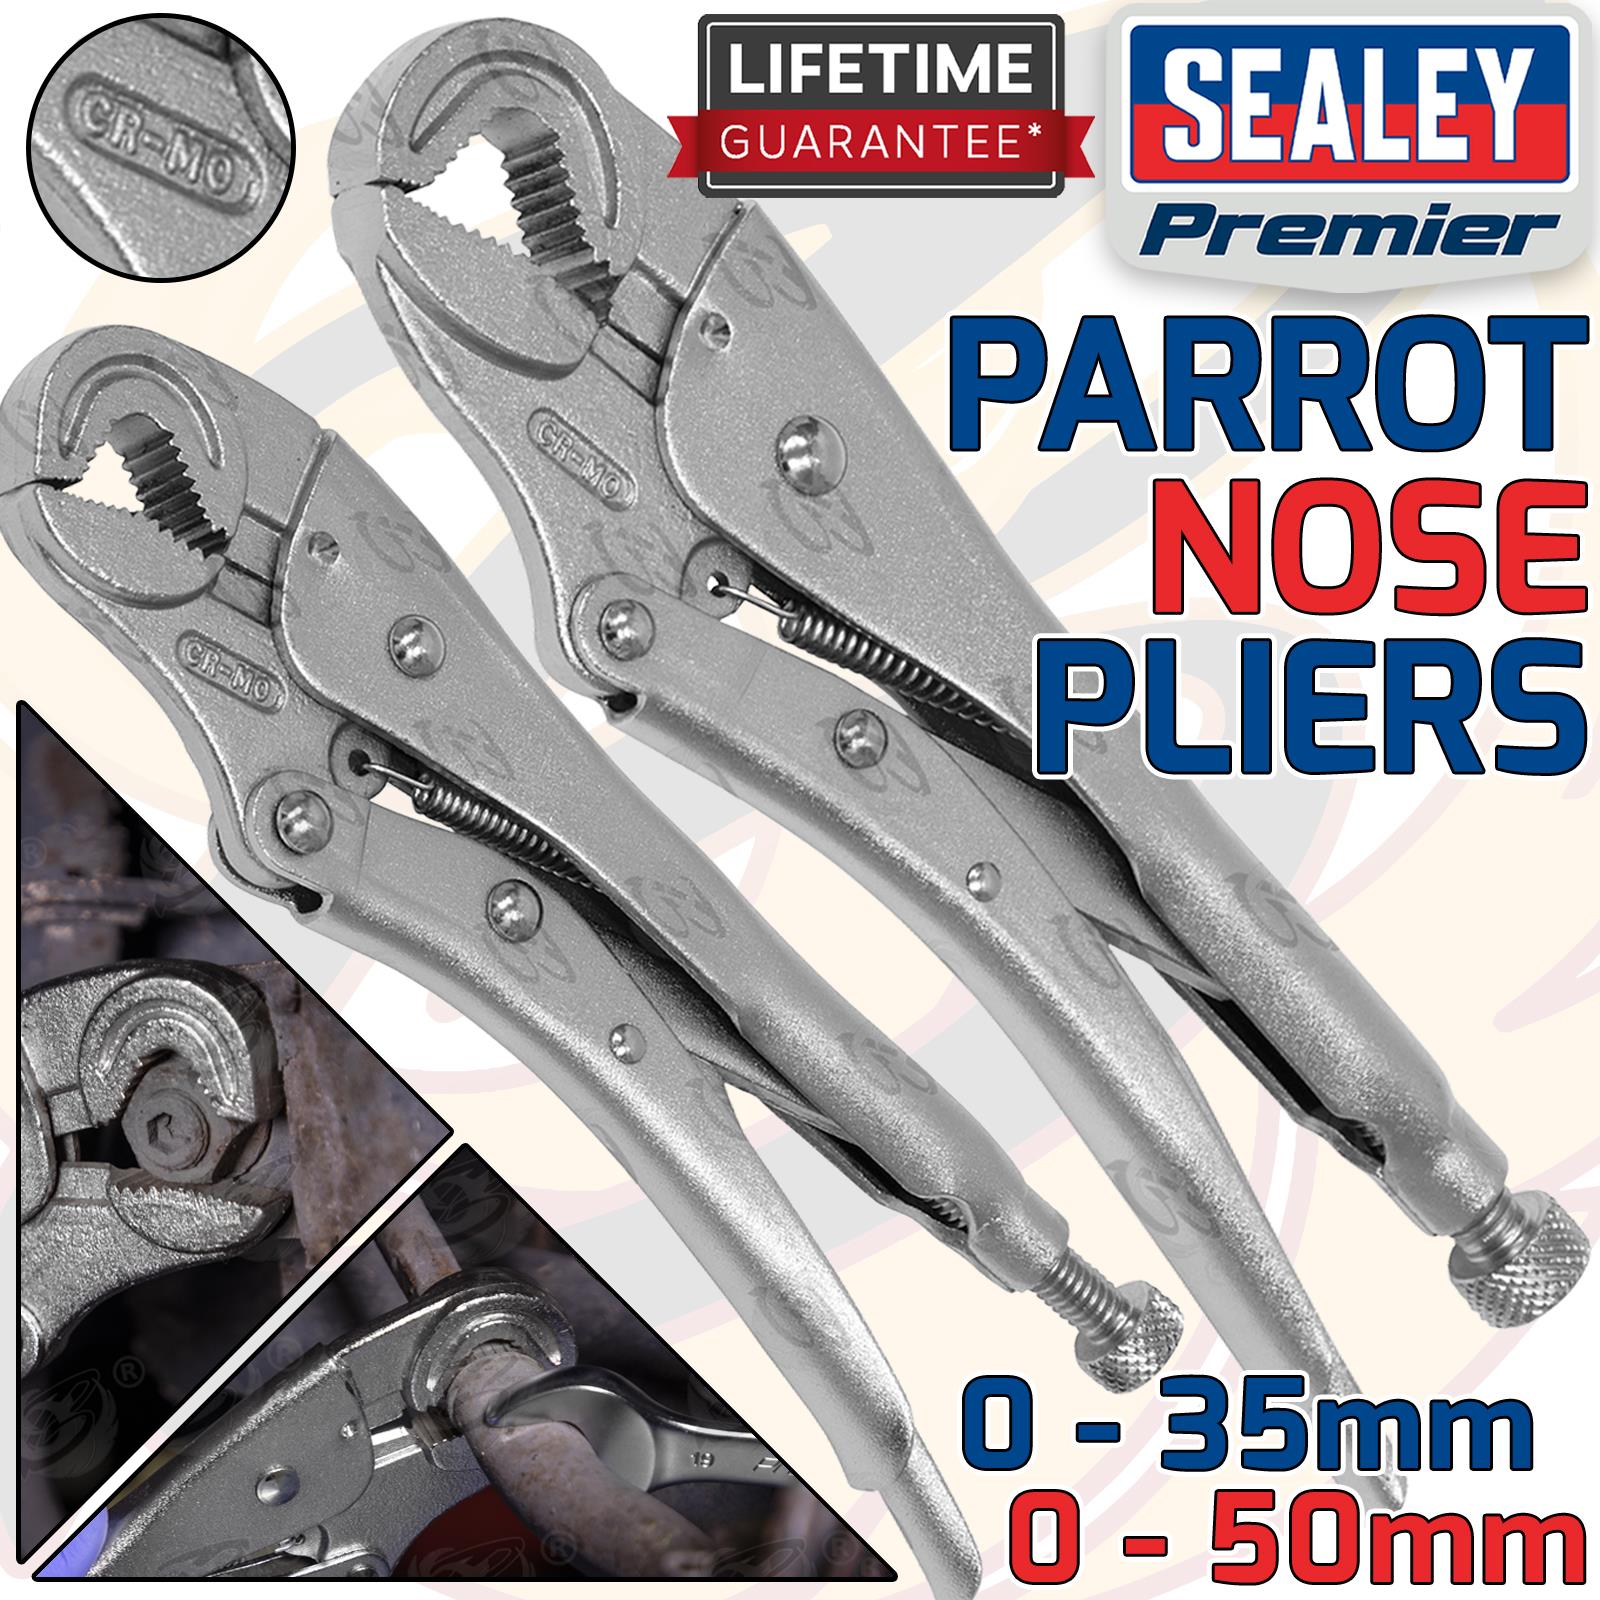 SEALEY 195MM & 235MM PARROT NOSE LOCKING PLIERS